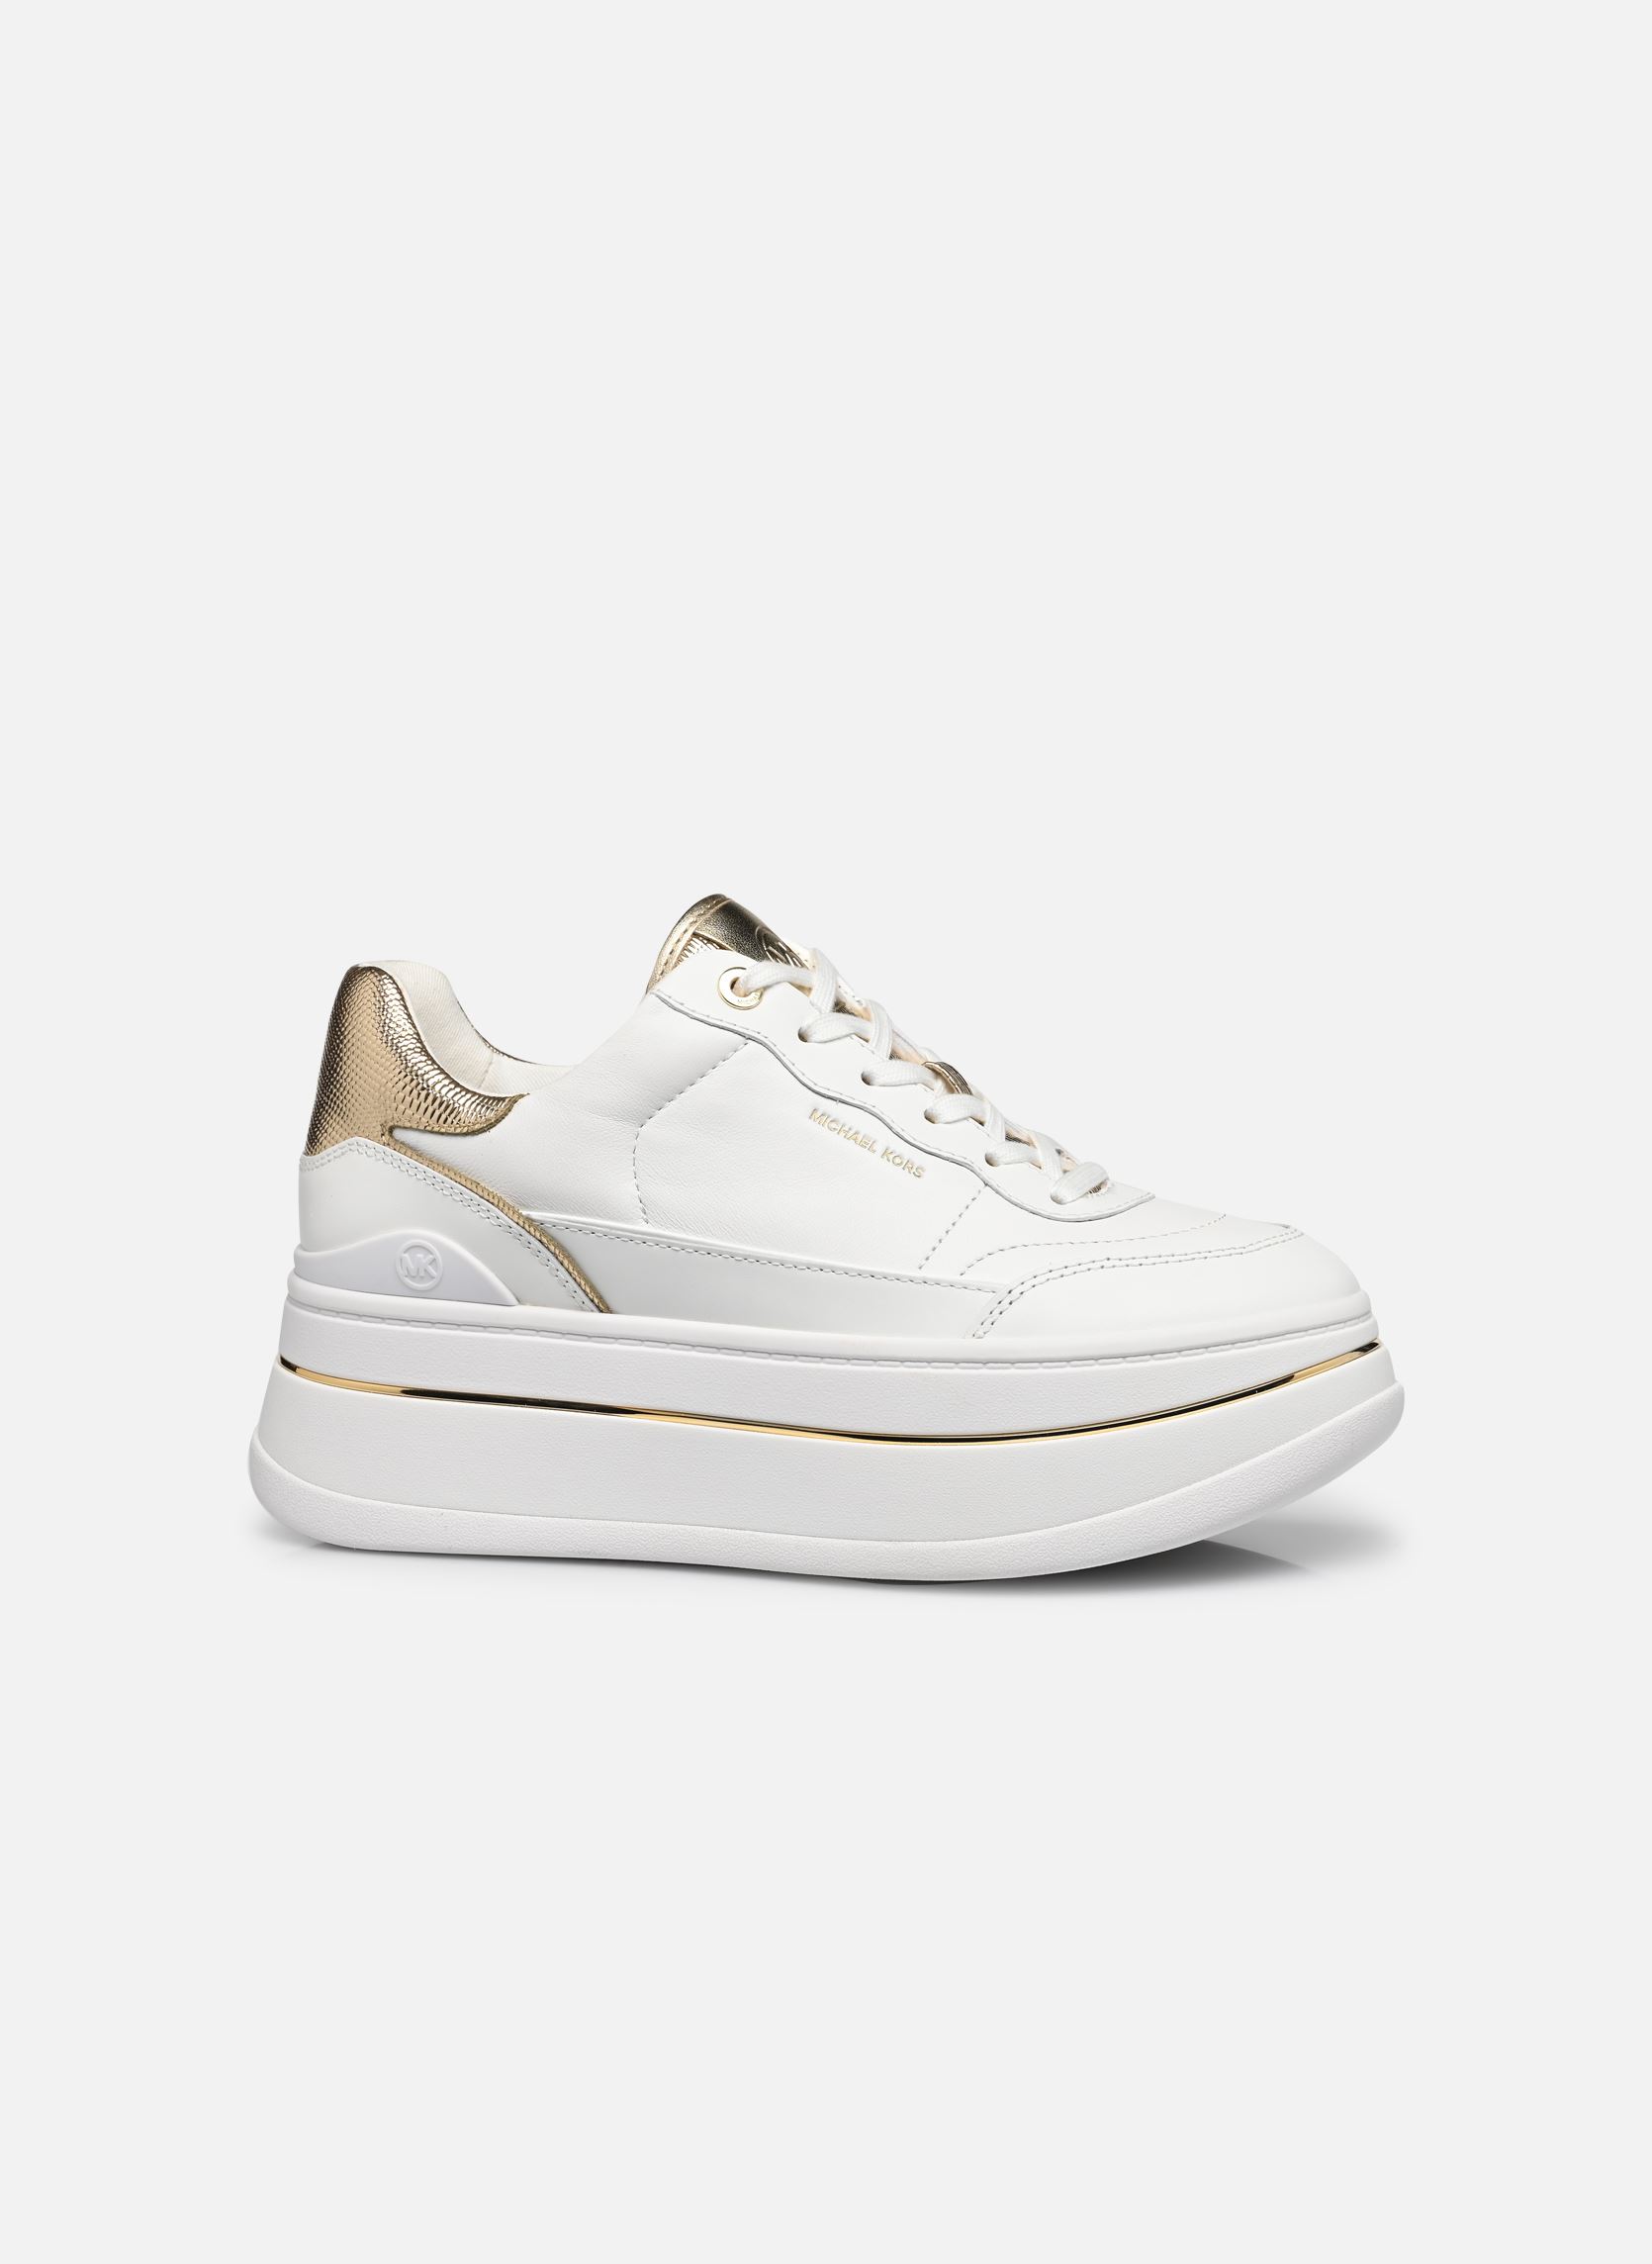 MICHAEL KORS HAYES LACE UP LEATHER SNEAKERS